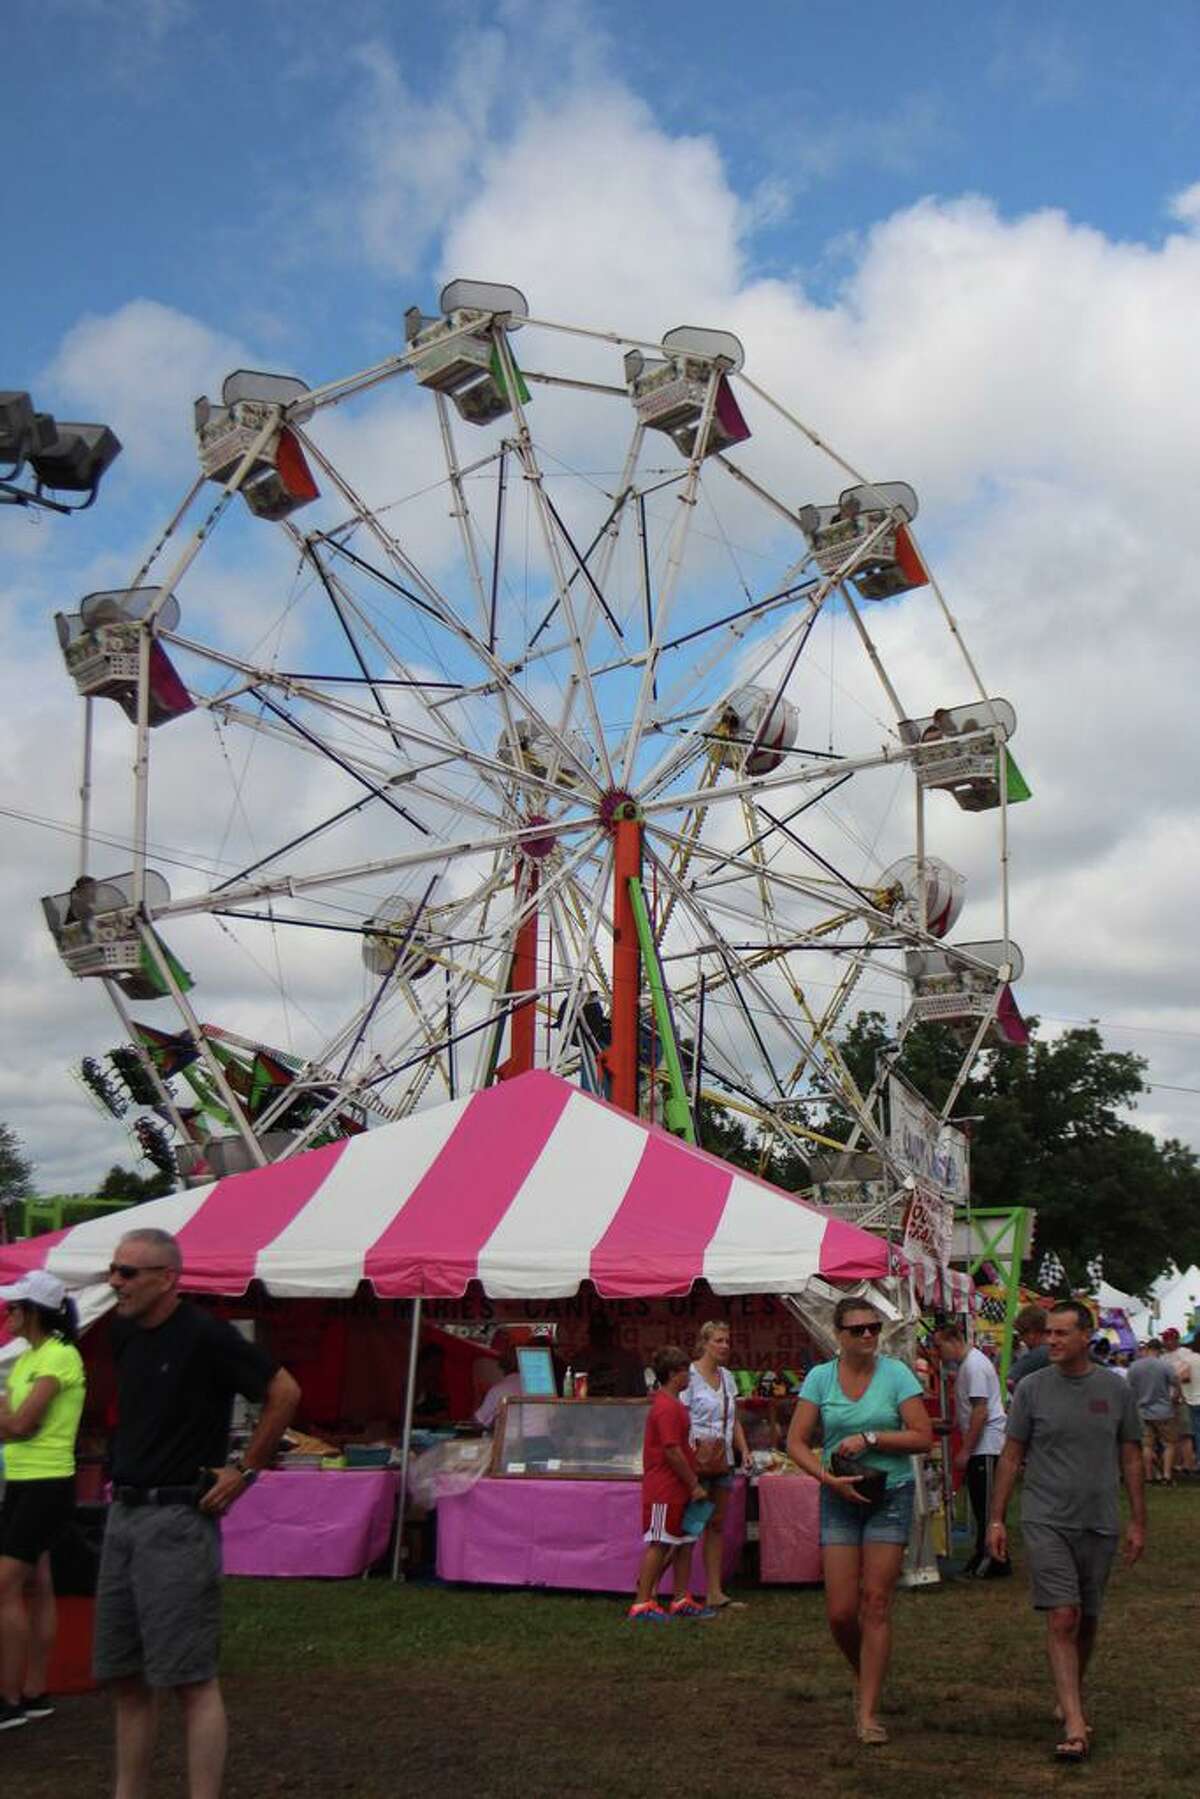 The fair will feature a variety of new vendors, performances and other entertainment.